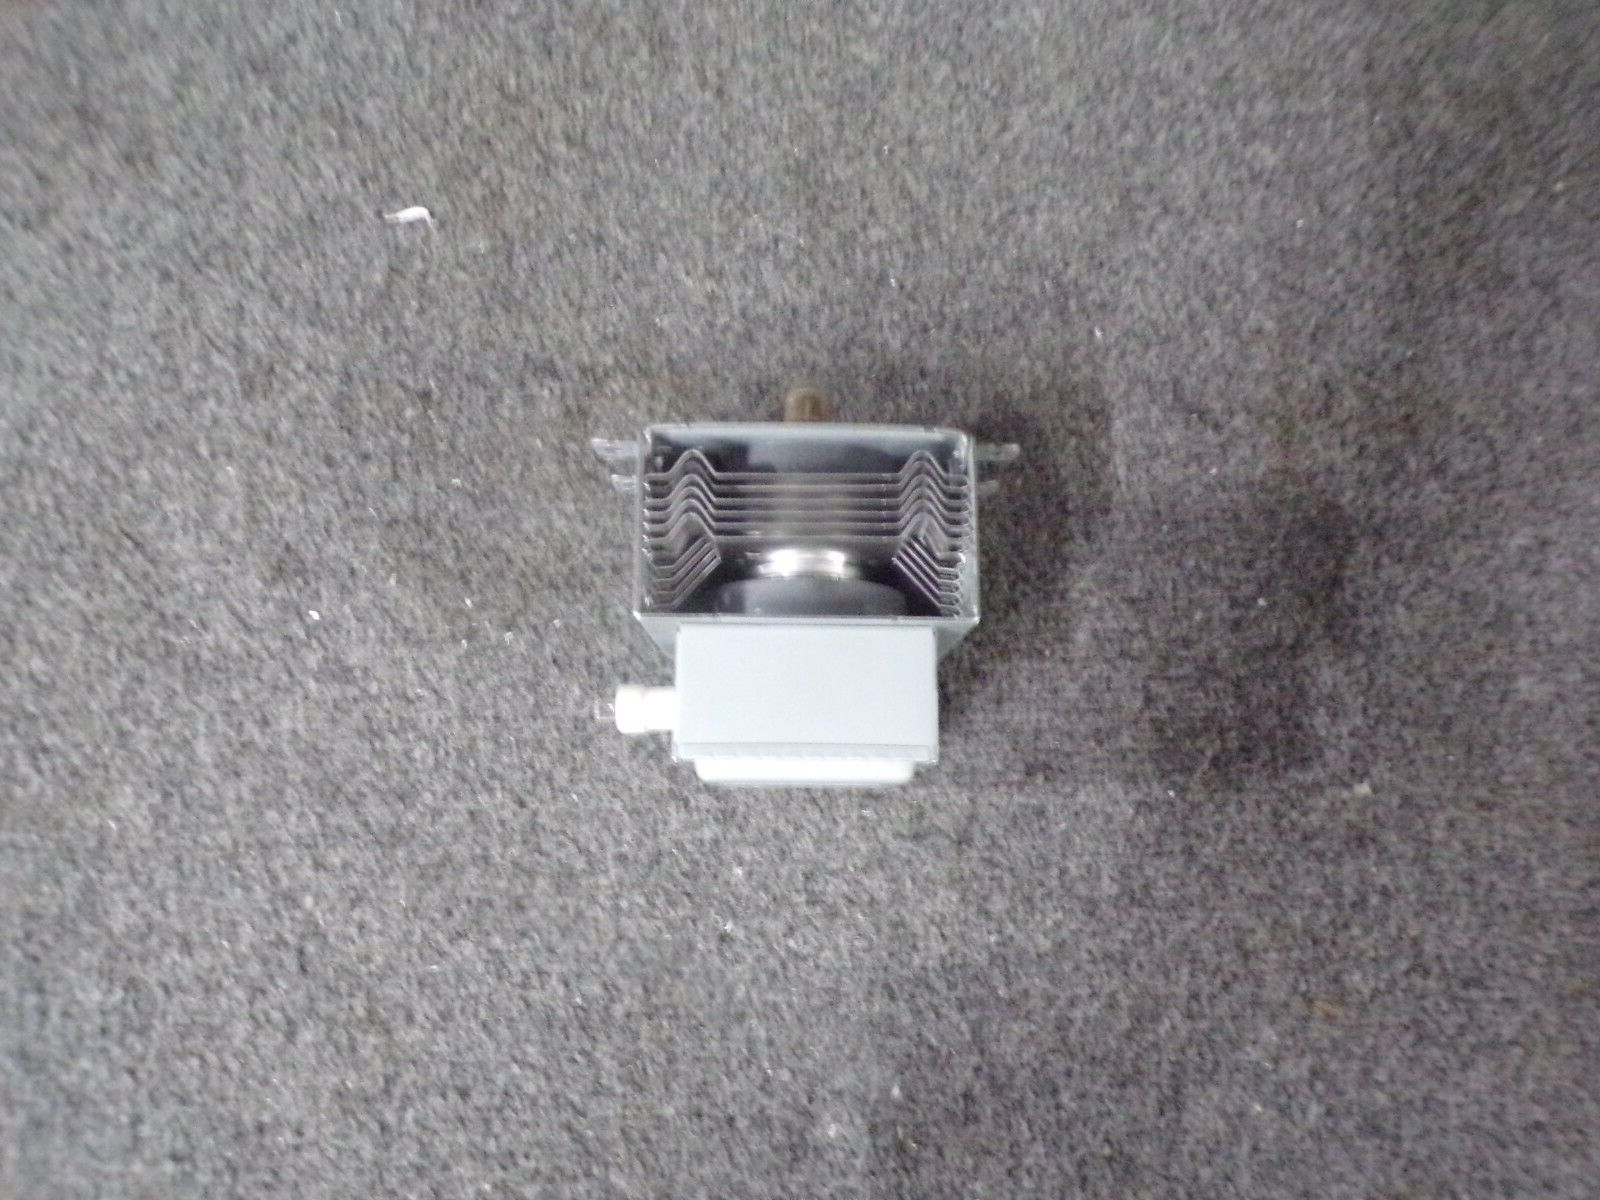 WB27X1156 KENMORE MICROWAVE OVEN MAGNETRON - $25.00